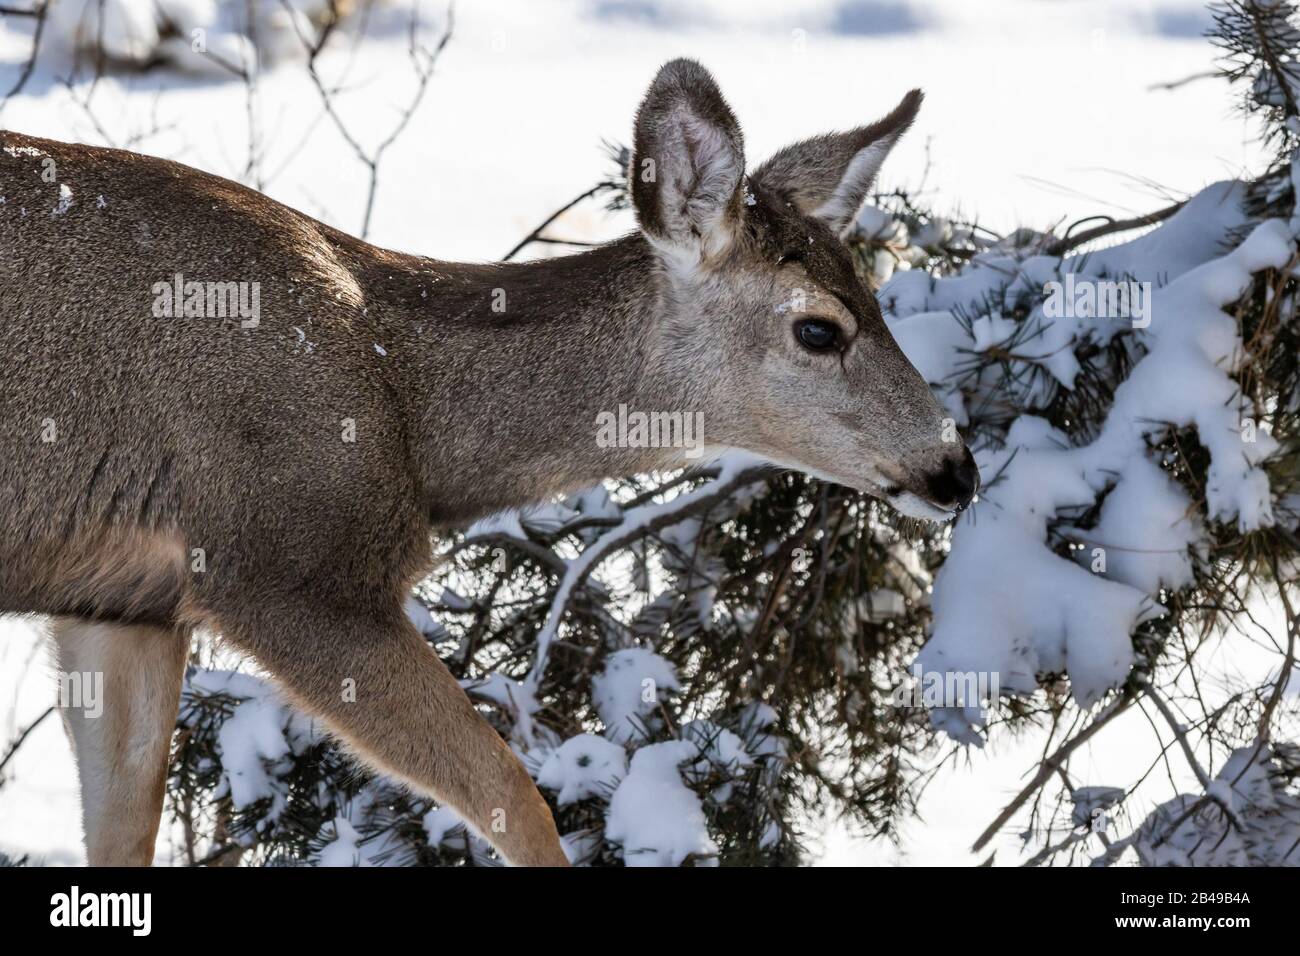 Male Kaibab deer (subspecies of mule deer) with antlers feeding during winter at Grand Canyon National Park. Snow in the background. Stock Photo